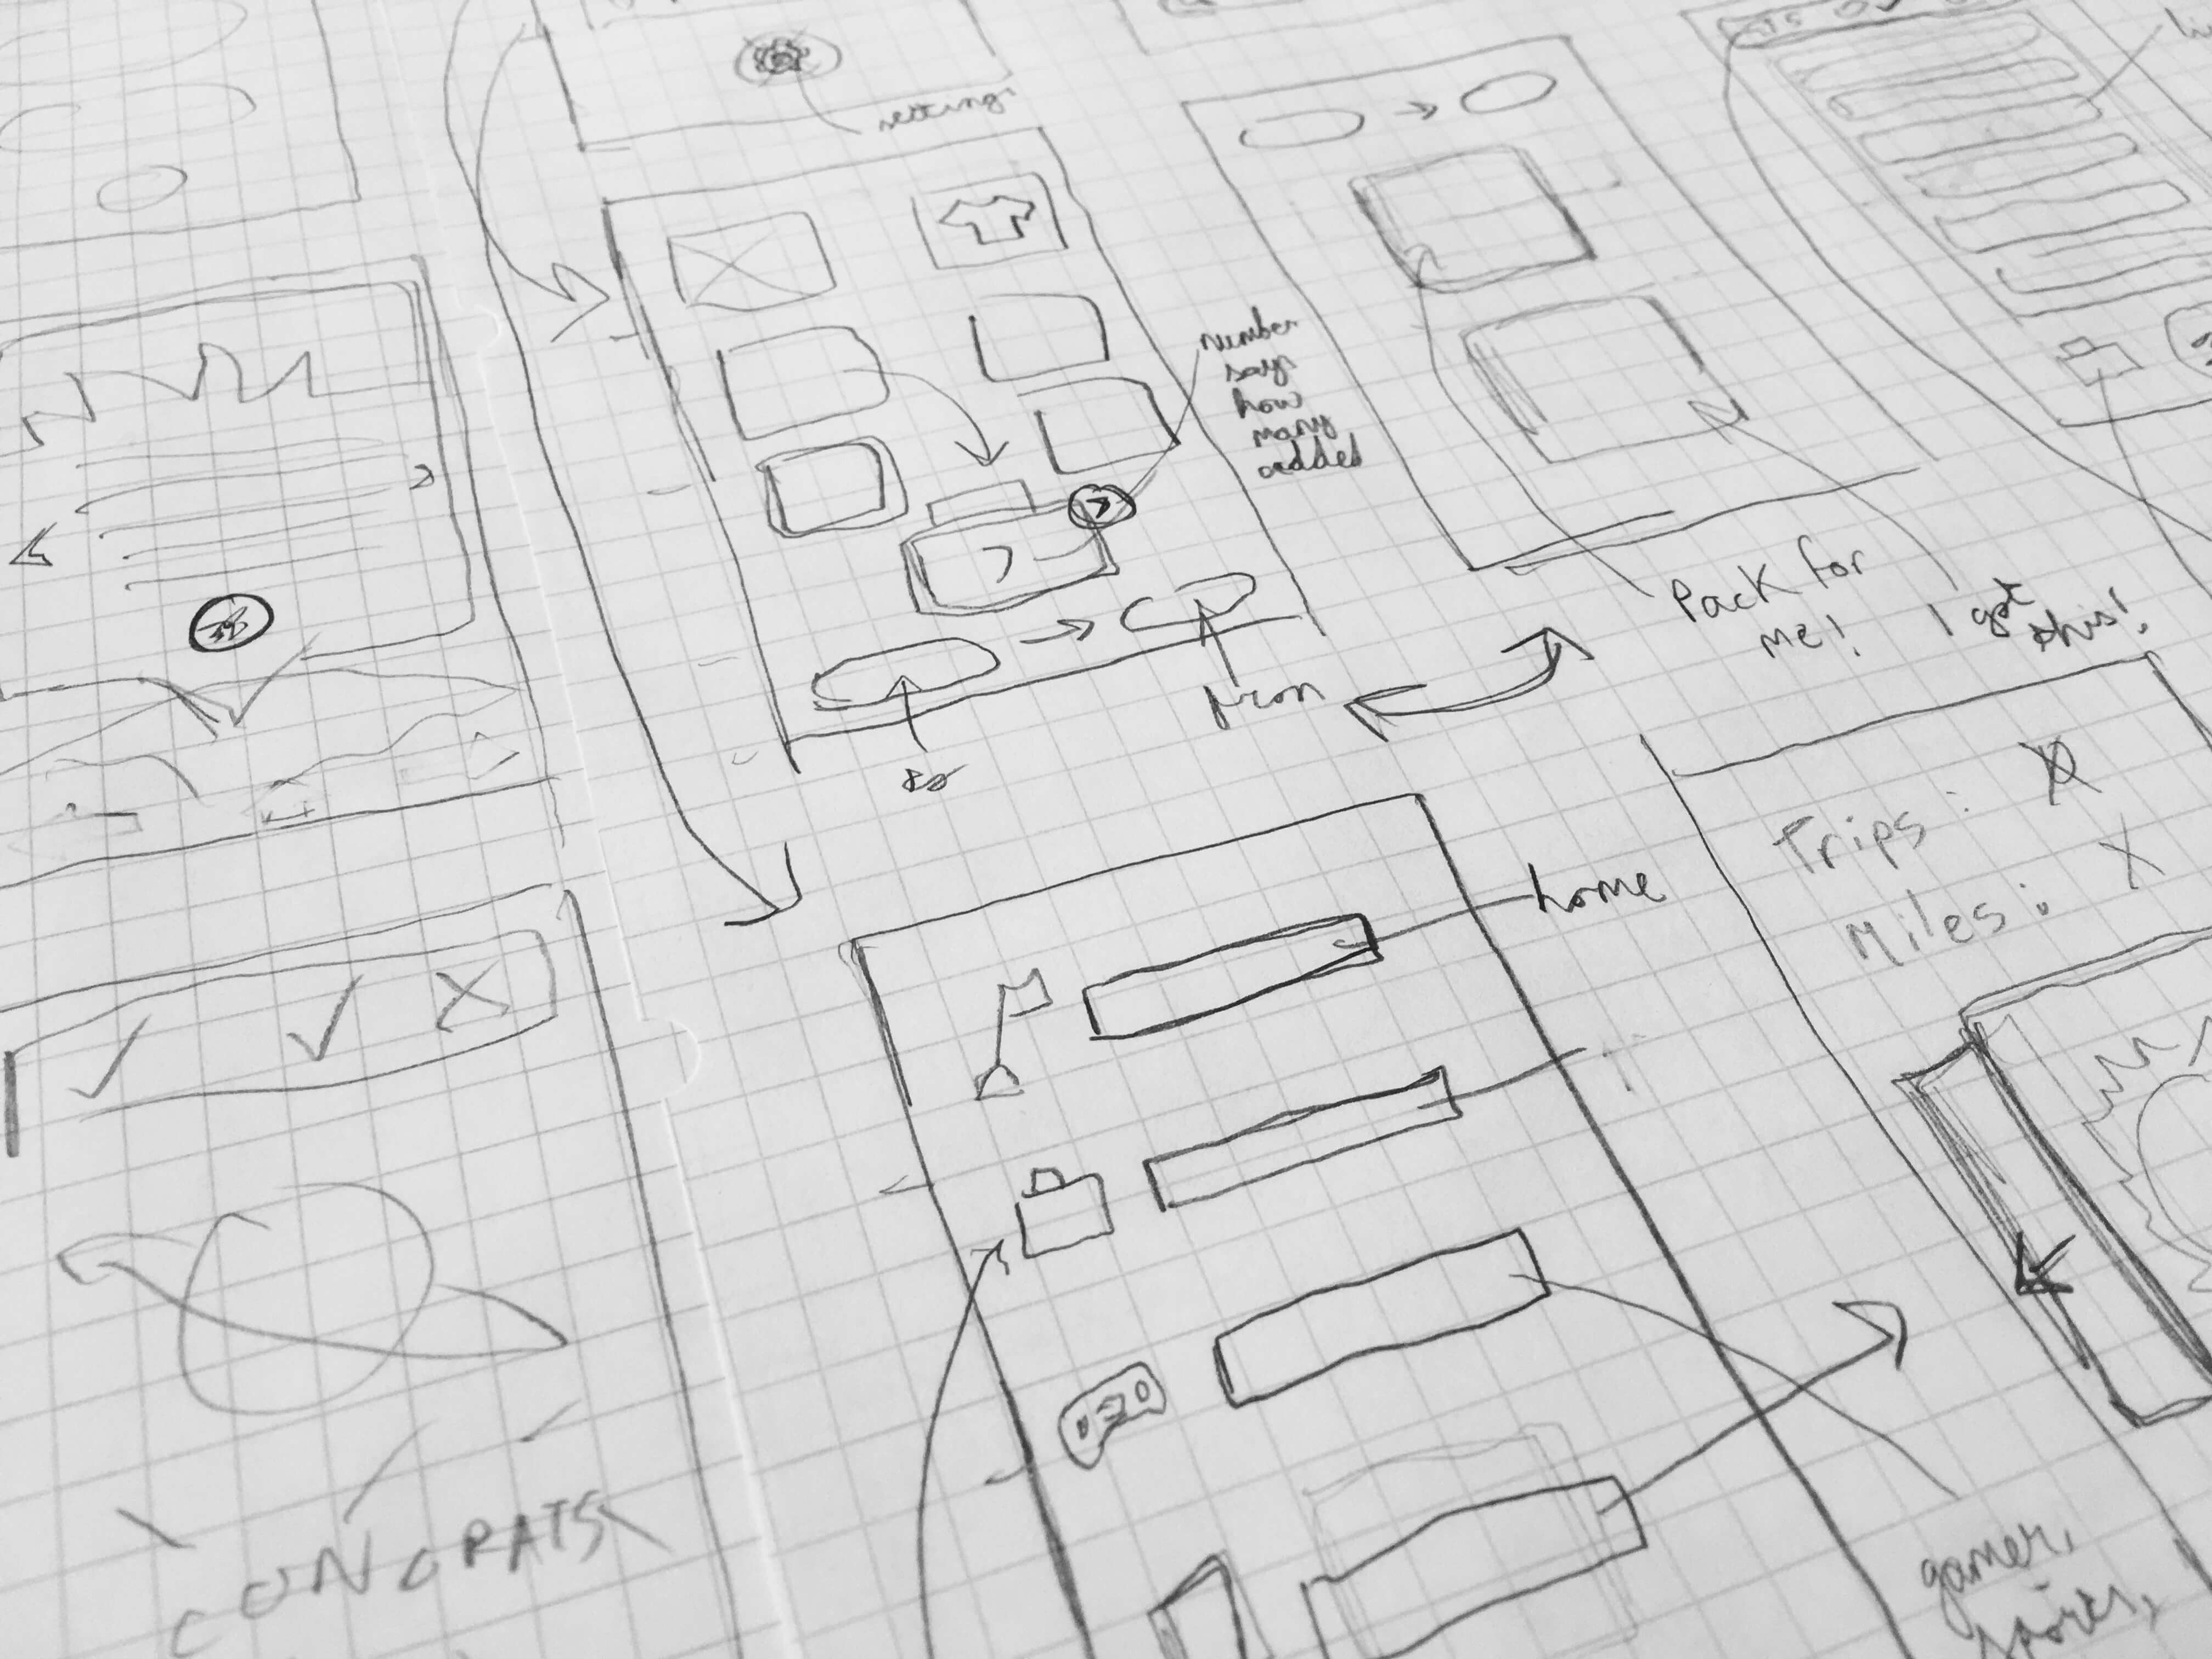 Sketching the interface